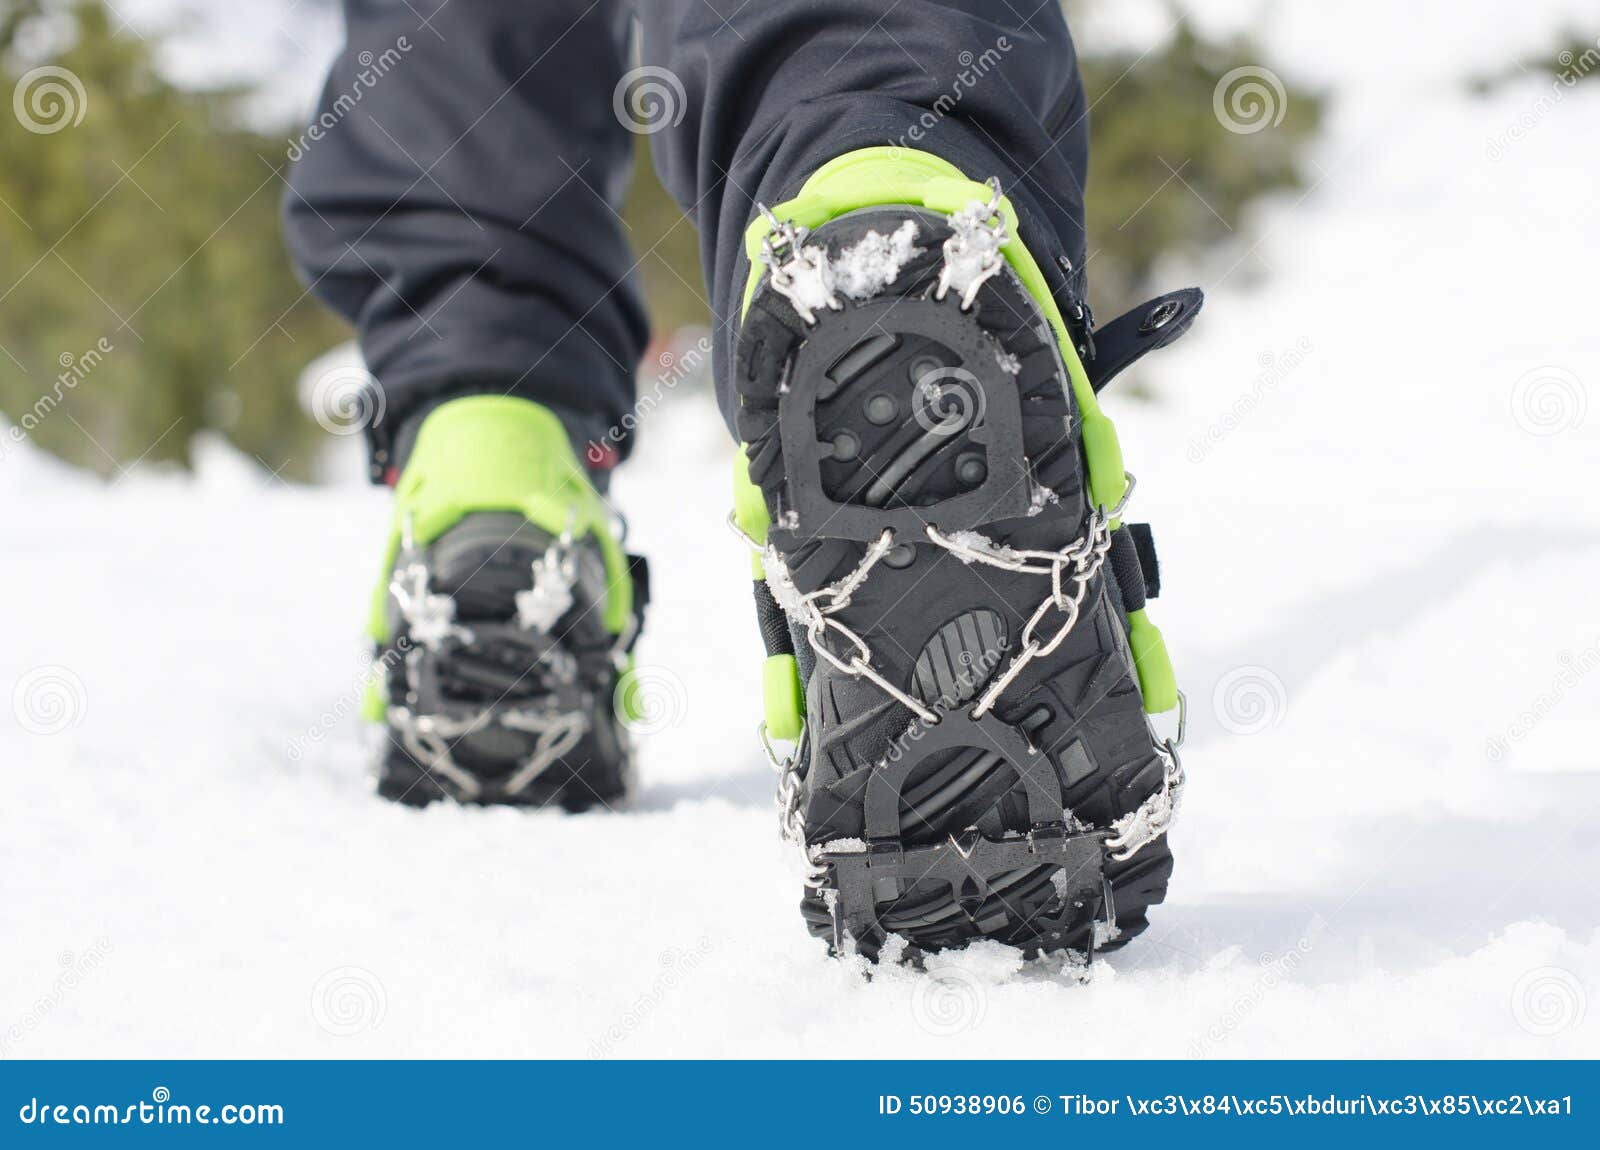 hiking boots with crampon, equipment for ice climbing